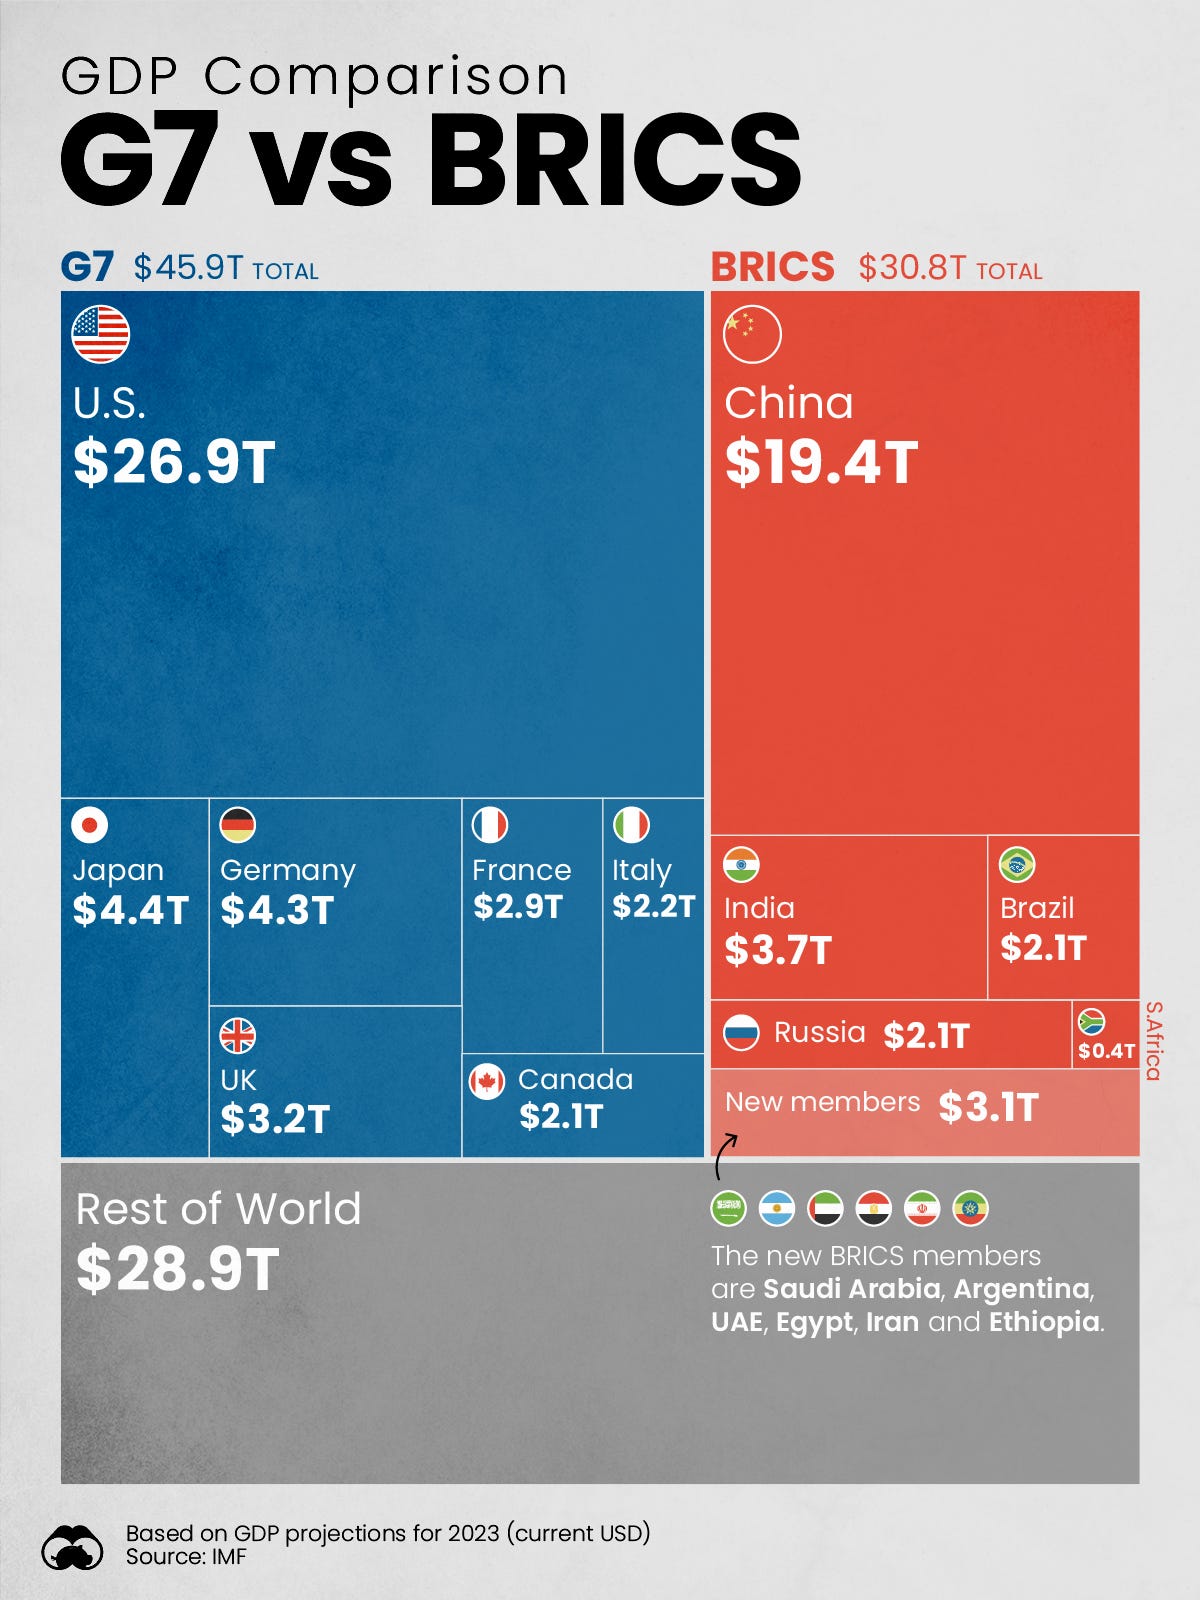 Visualization comparing BRICS GDP with G7 GDP in U.S. dollars.